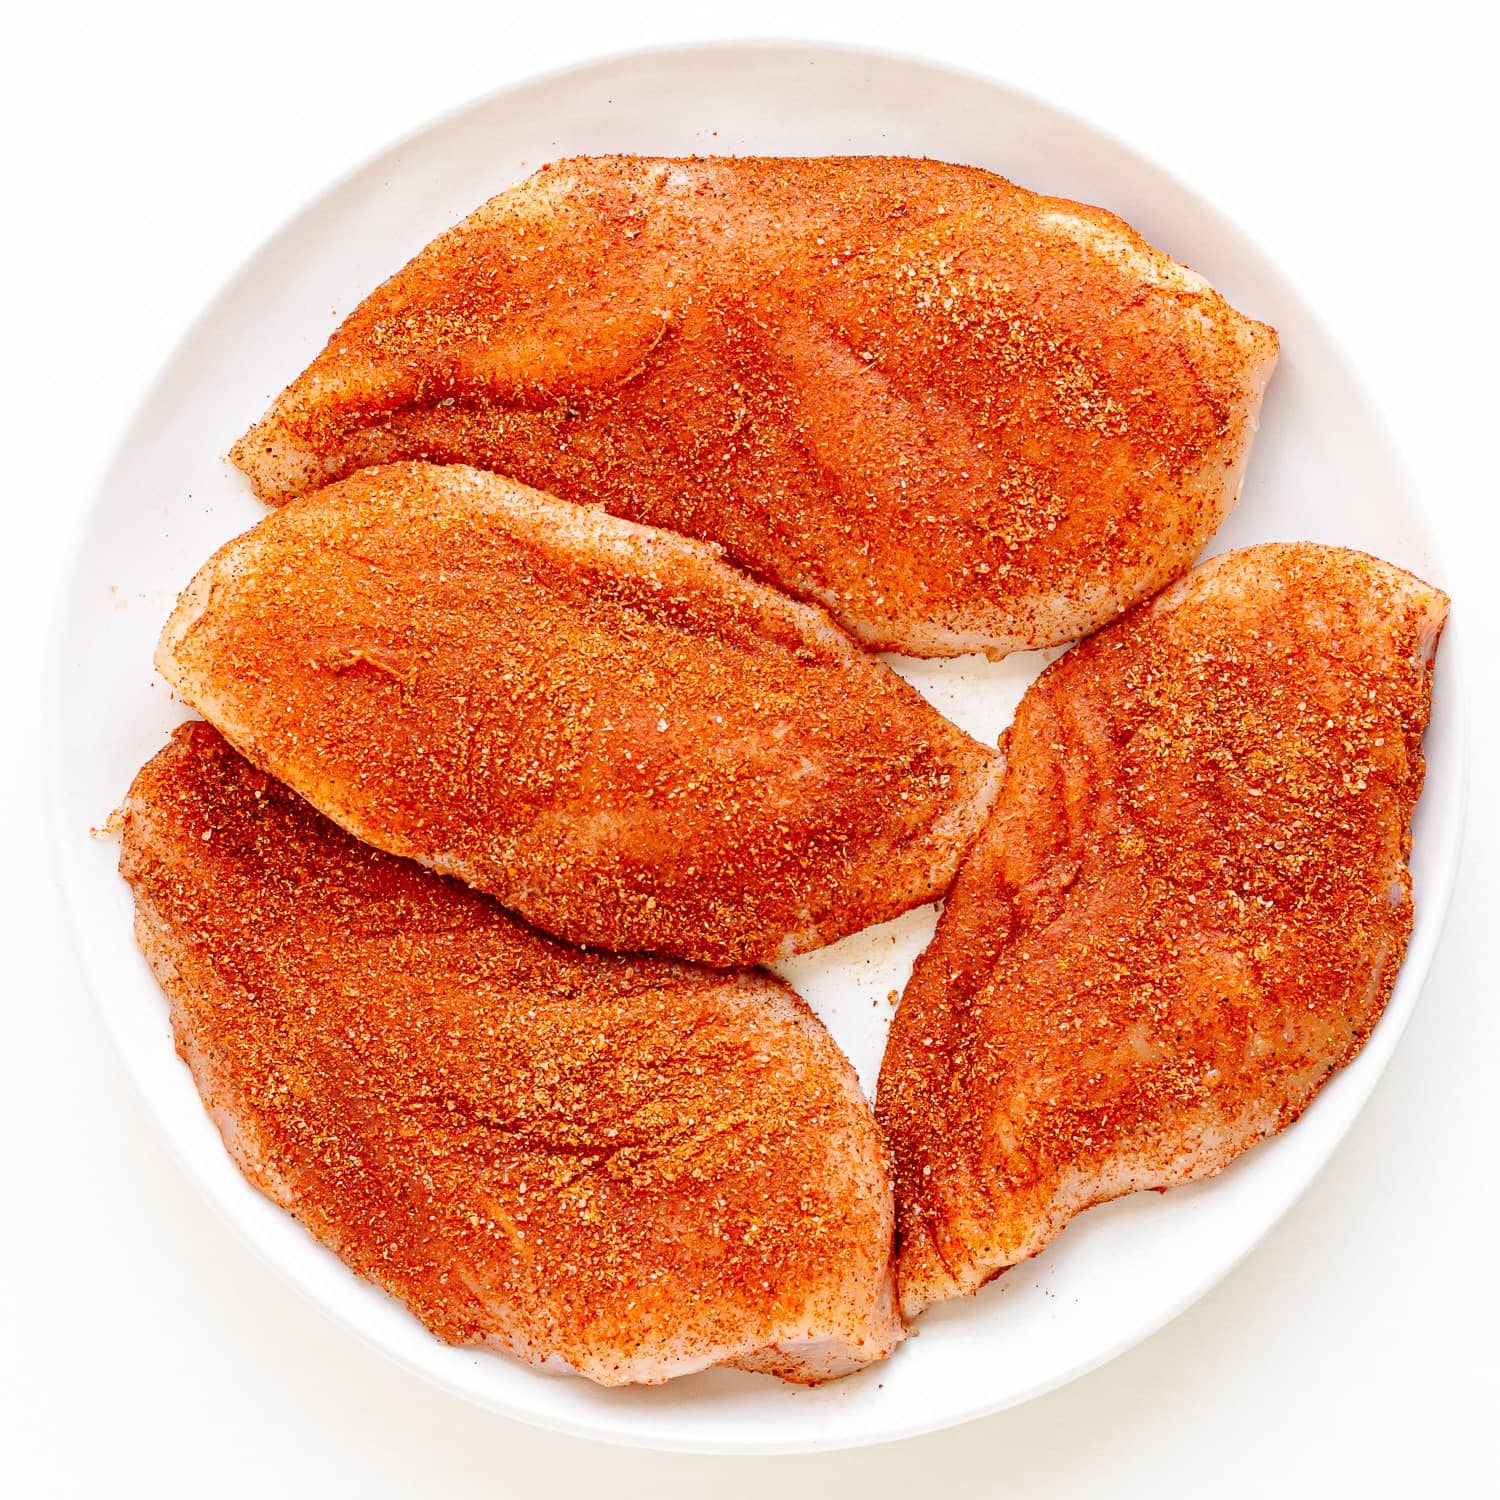 Four raw chicken breasts that have been seasoned with fajita seasoning on a white plate.